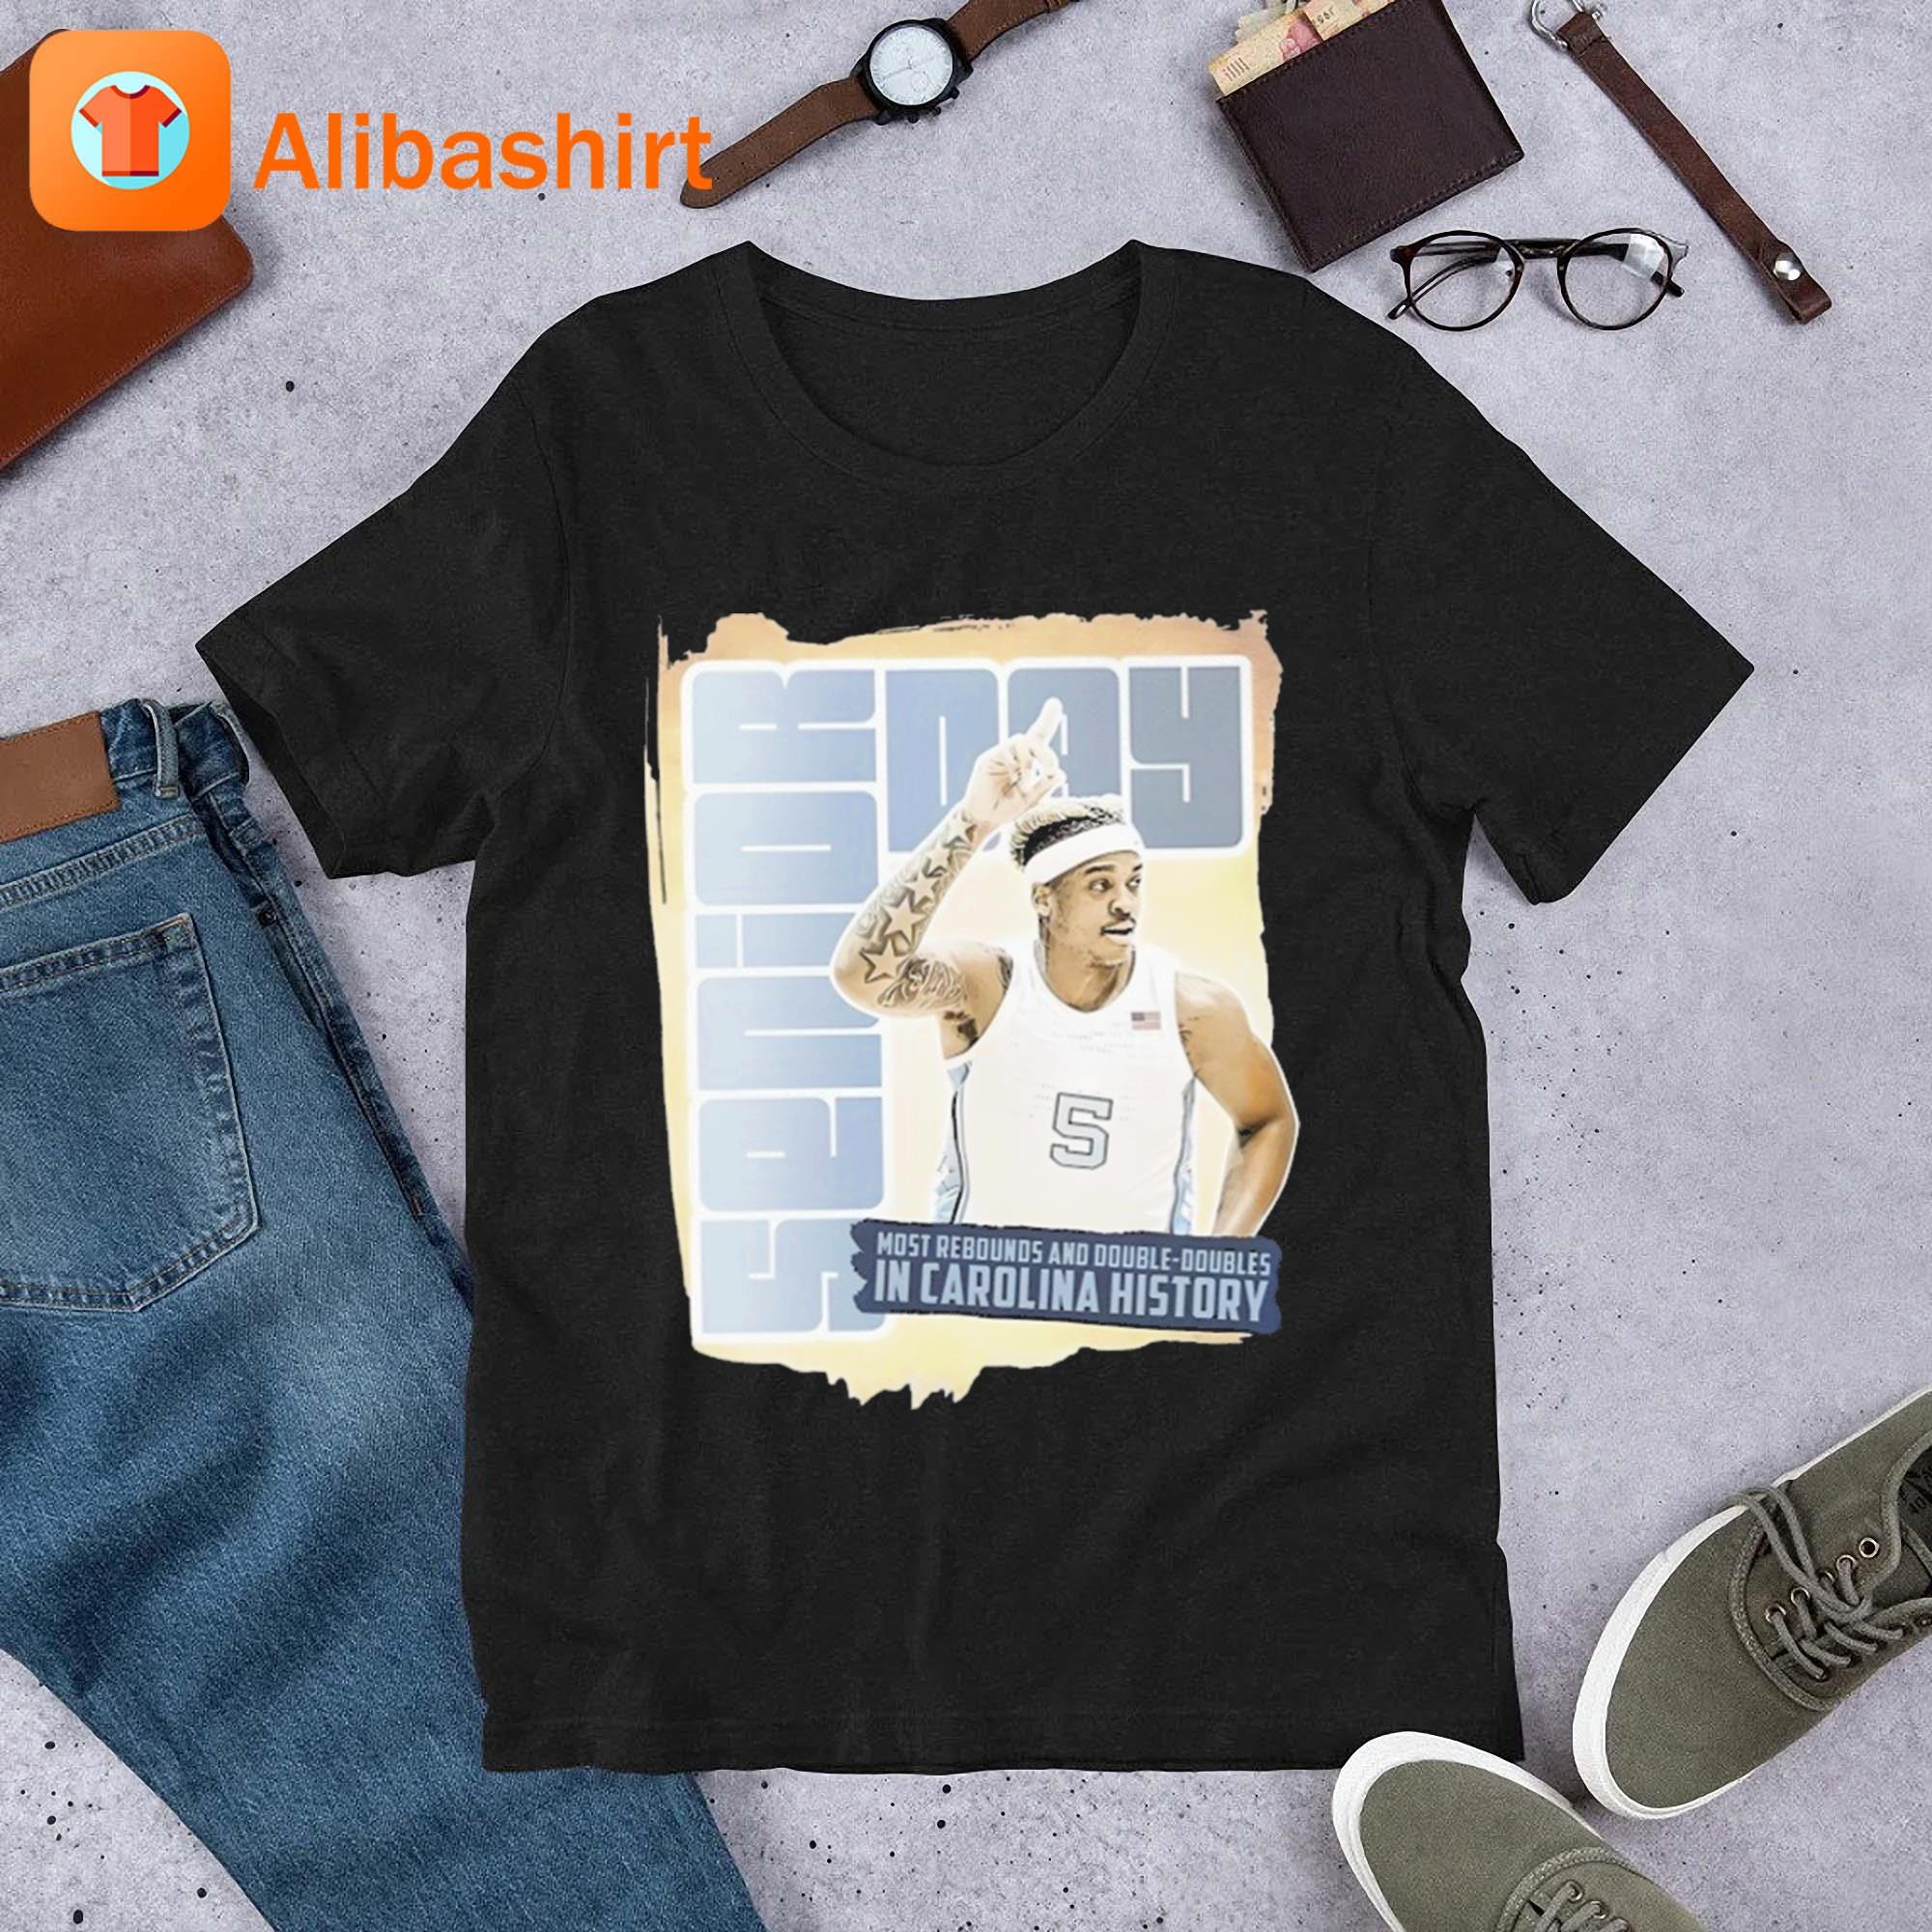 Senior Day Most Rebounds And Double-Doubles In Carolina History Shirt